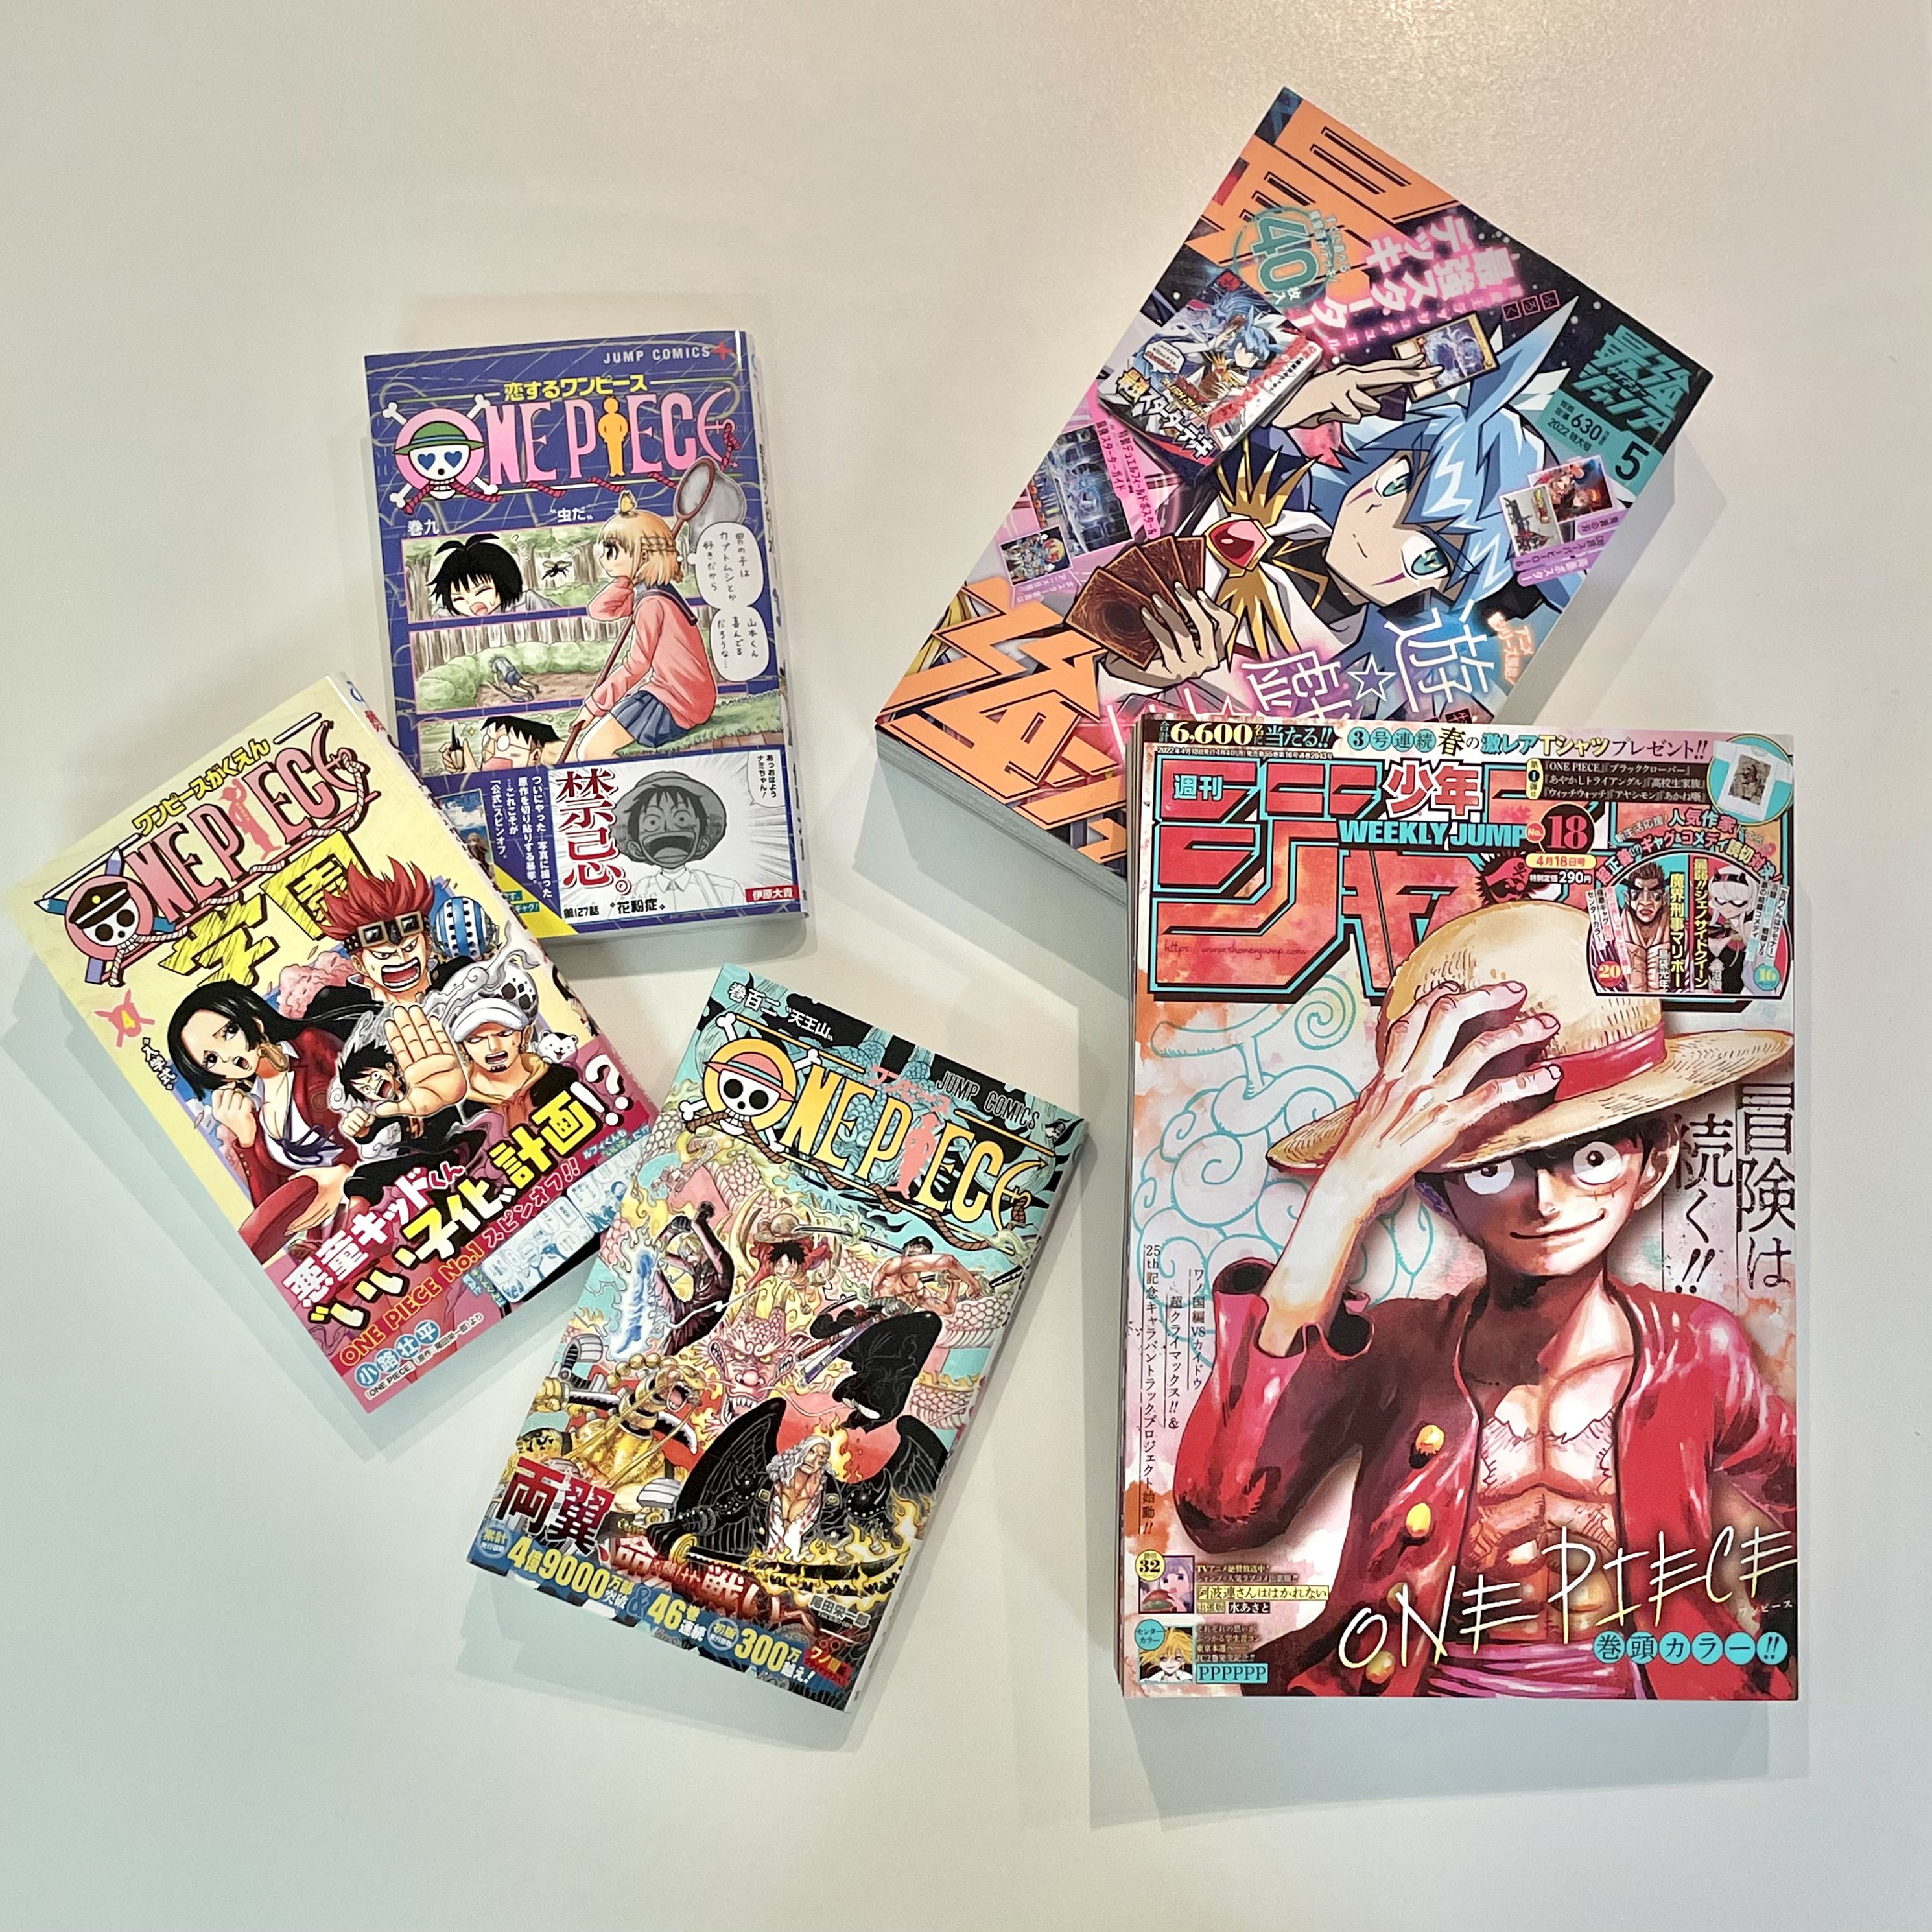 One Piece スタッフ 公式 Official 本日発売 本日は Onepiece 祭り One Piece 102巻 One Piece学園 4巻 恋するワンピース 9巻 週刊少年ジャンプ 18号 最強ジャンプ 5月特大号 すべて本日発売です 原作もスピンオフもメディア